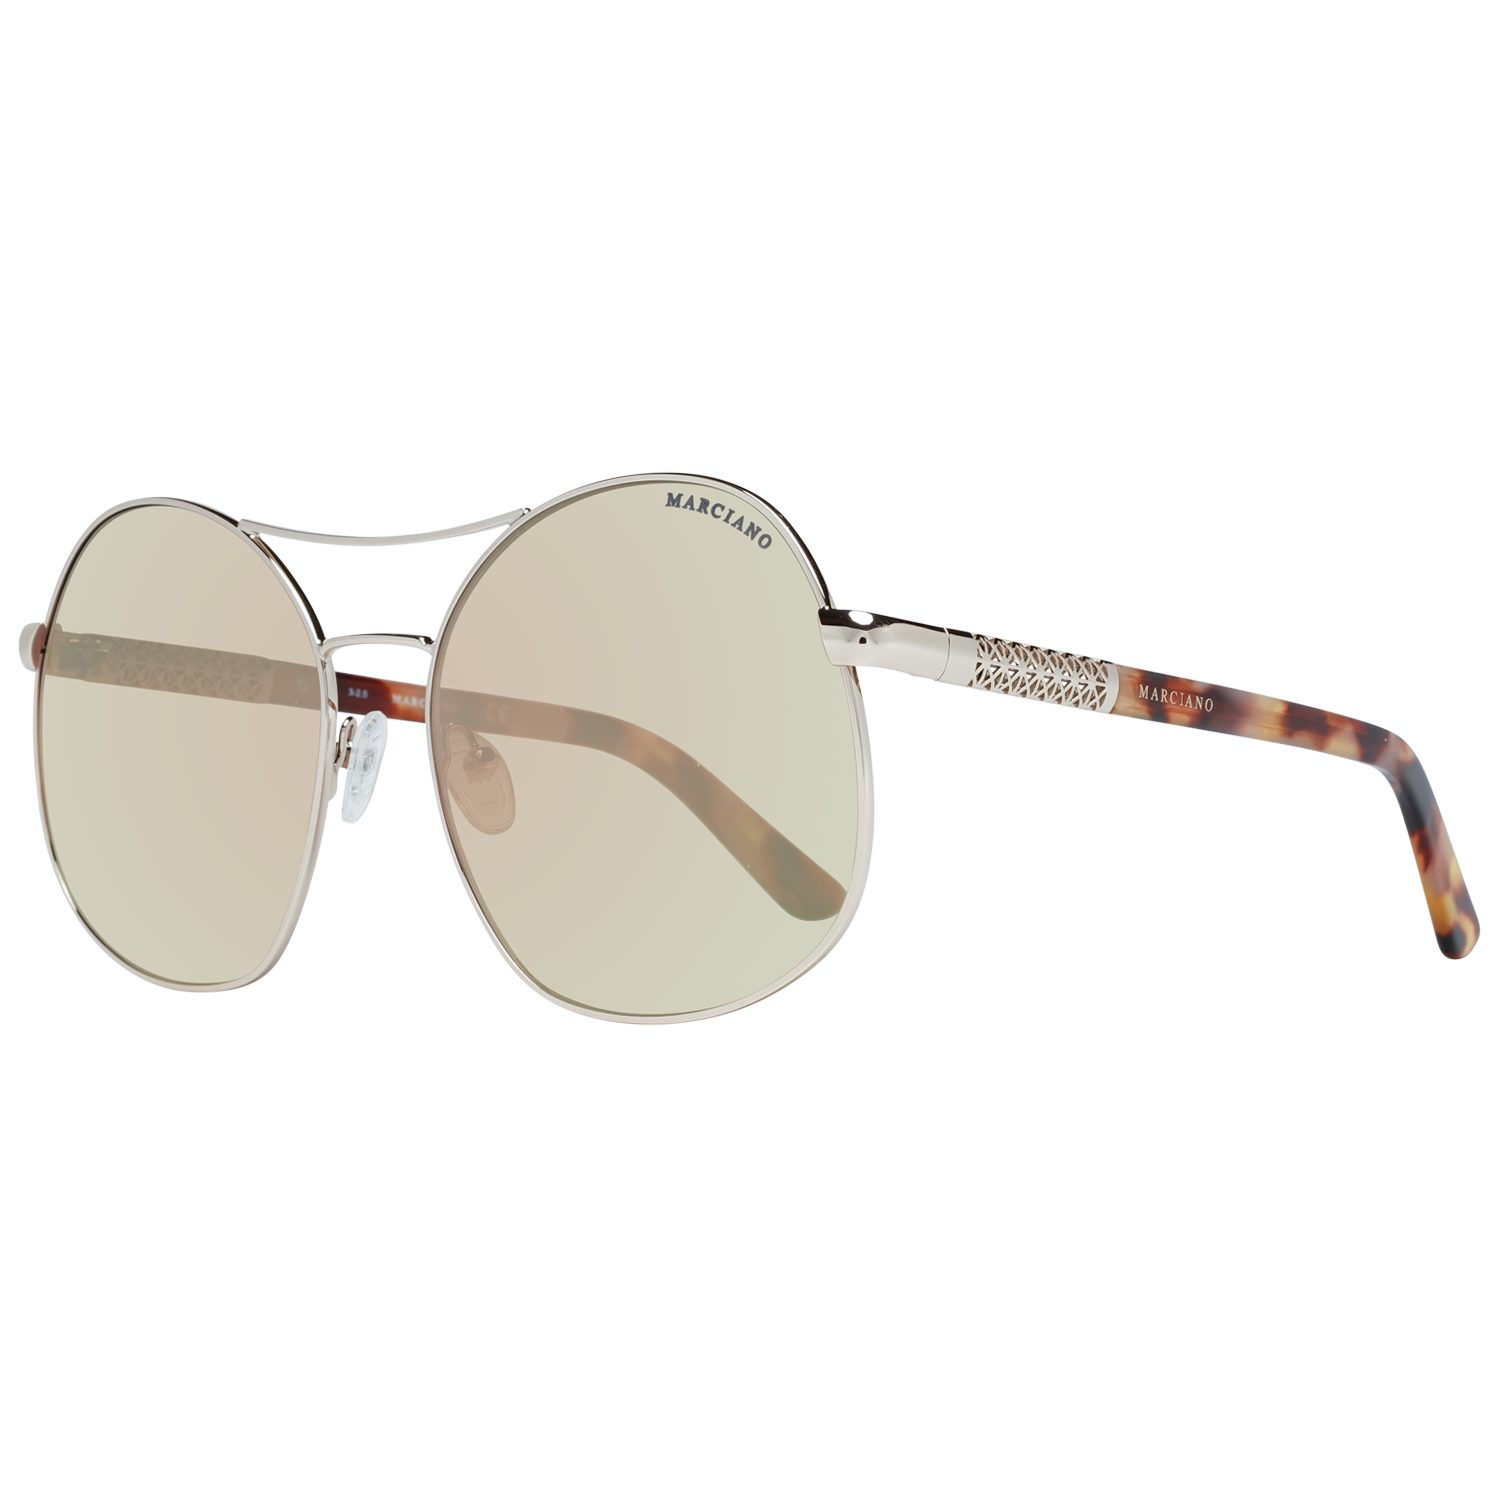 Marciano by Sonnenbrille Guess